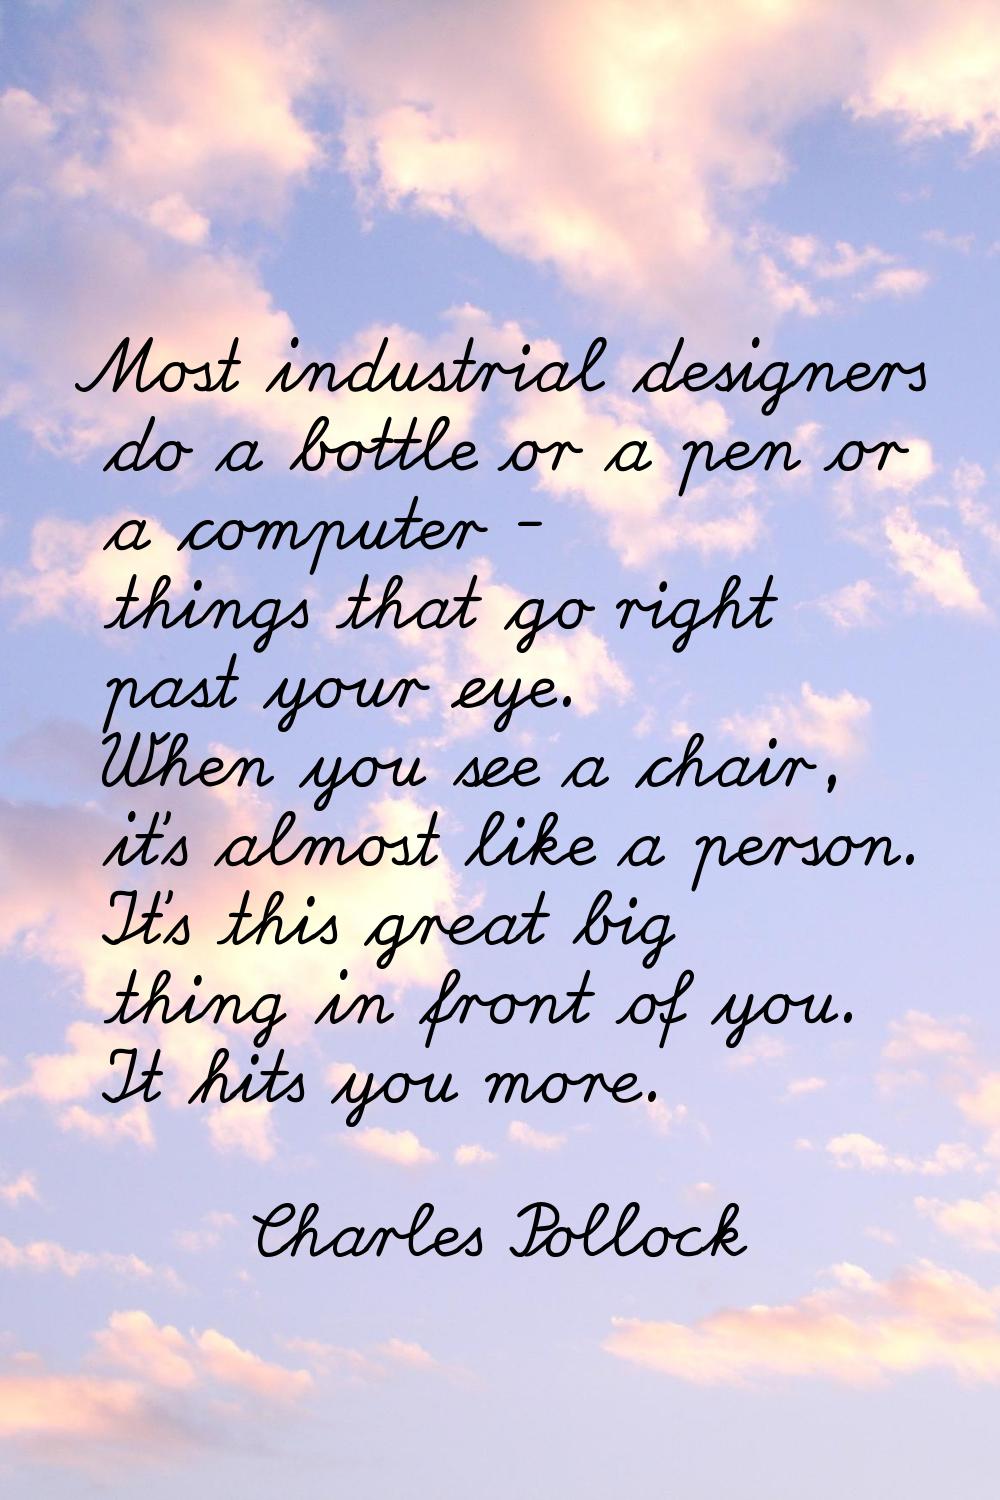 Most industrial designers do a bottle or a pen or a computer - things that go right past your eye. 